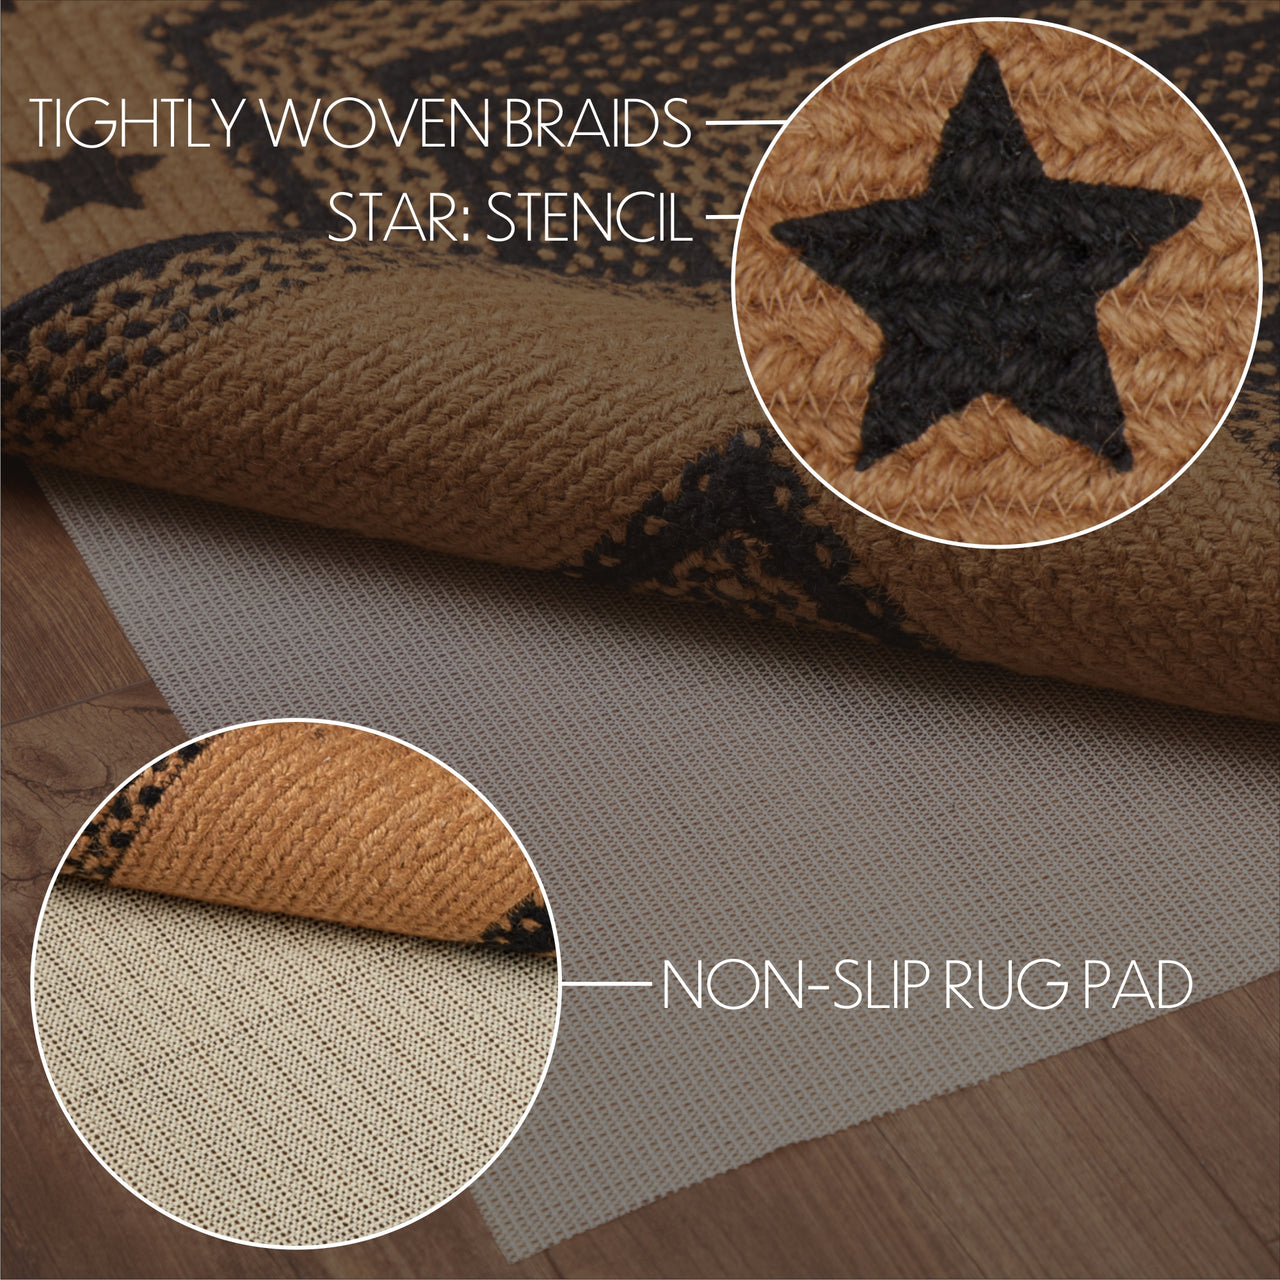 Farmhouse Jute Braided Rug/Runner Rect. Stencil Stars with Rug Pad 2'x6.5' VHC Brands